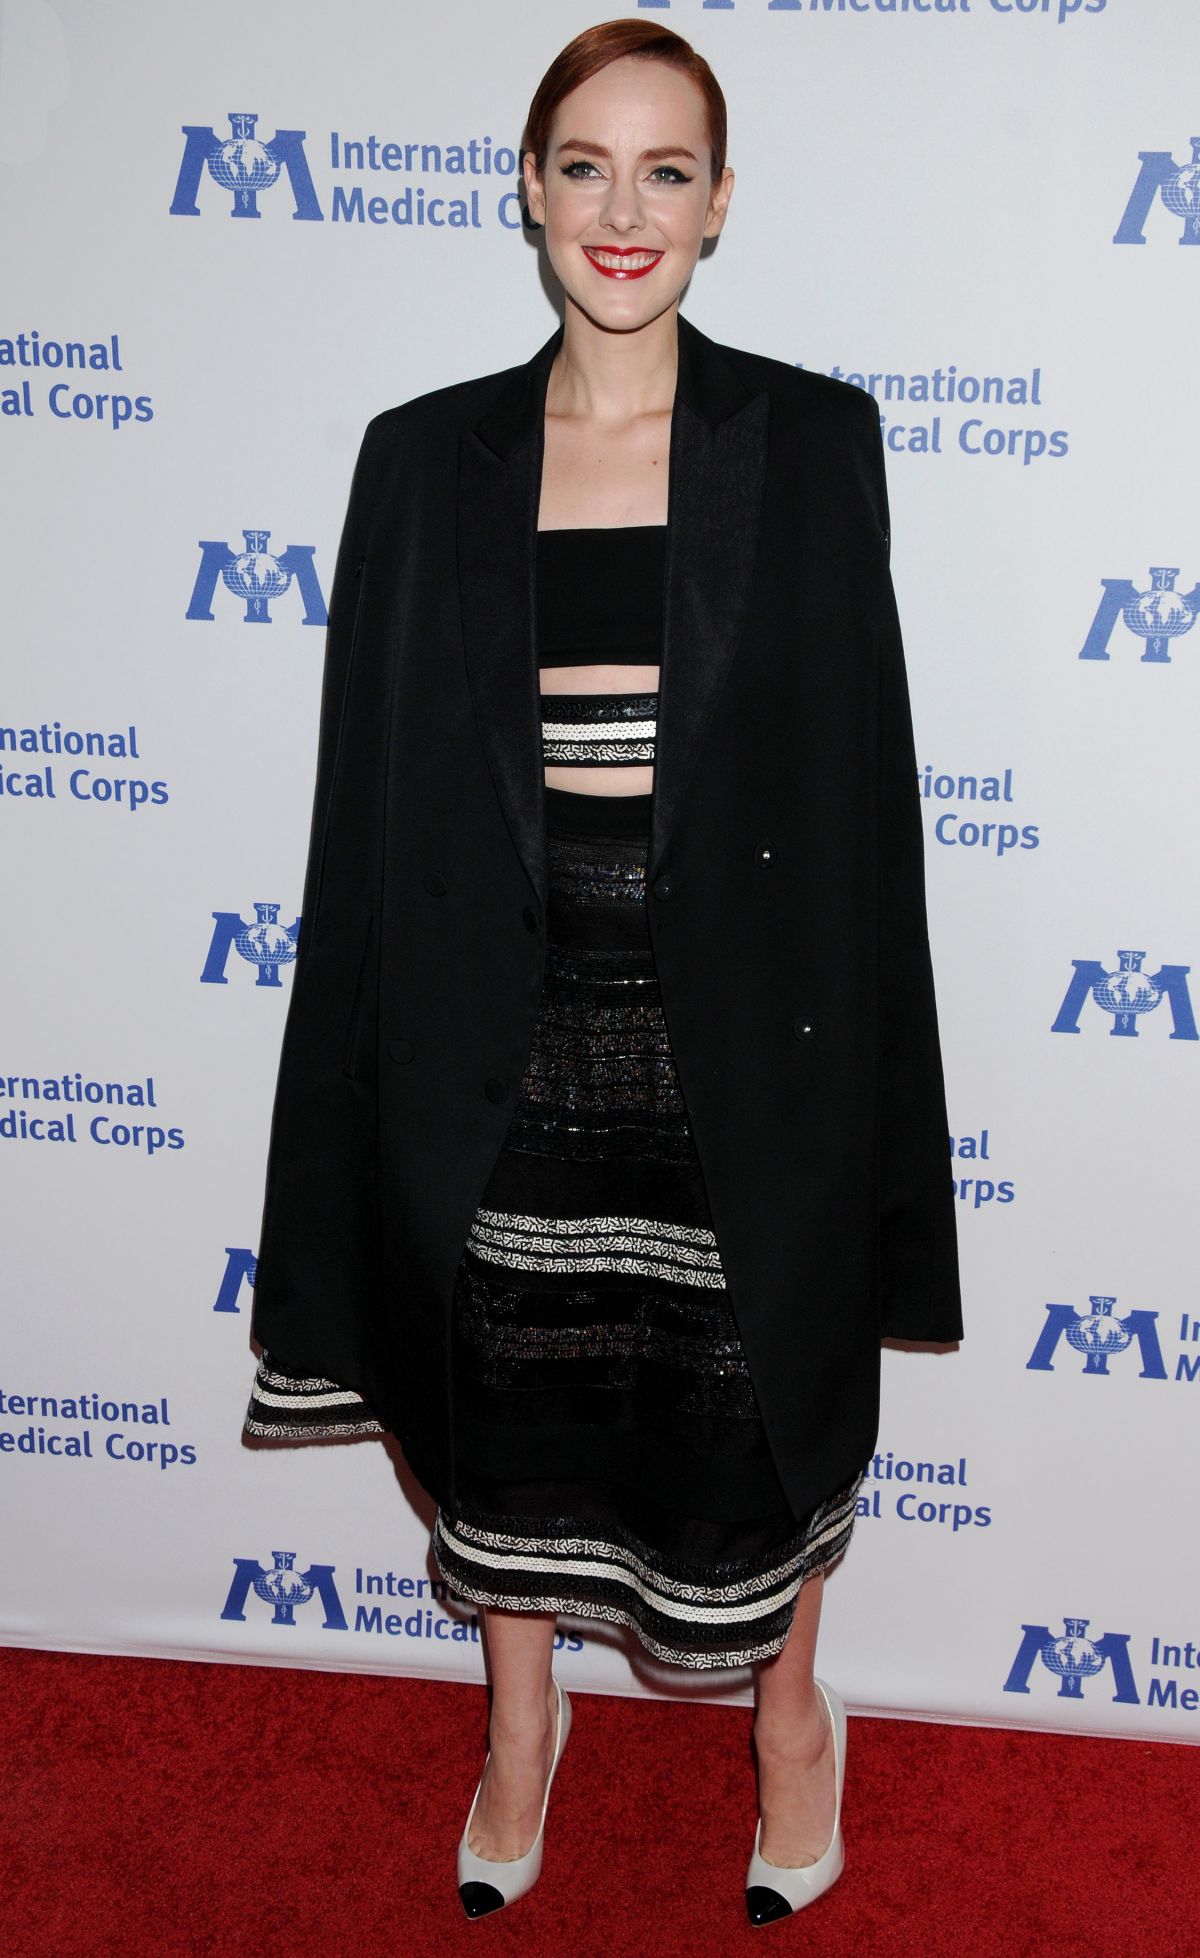 JENA MALONE at International Medical Corps Annual Awards in Beverly ...